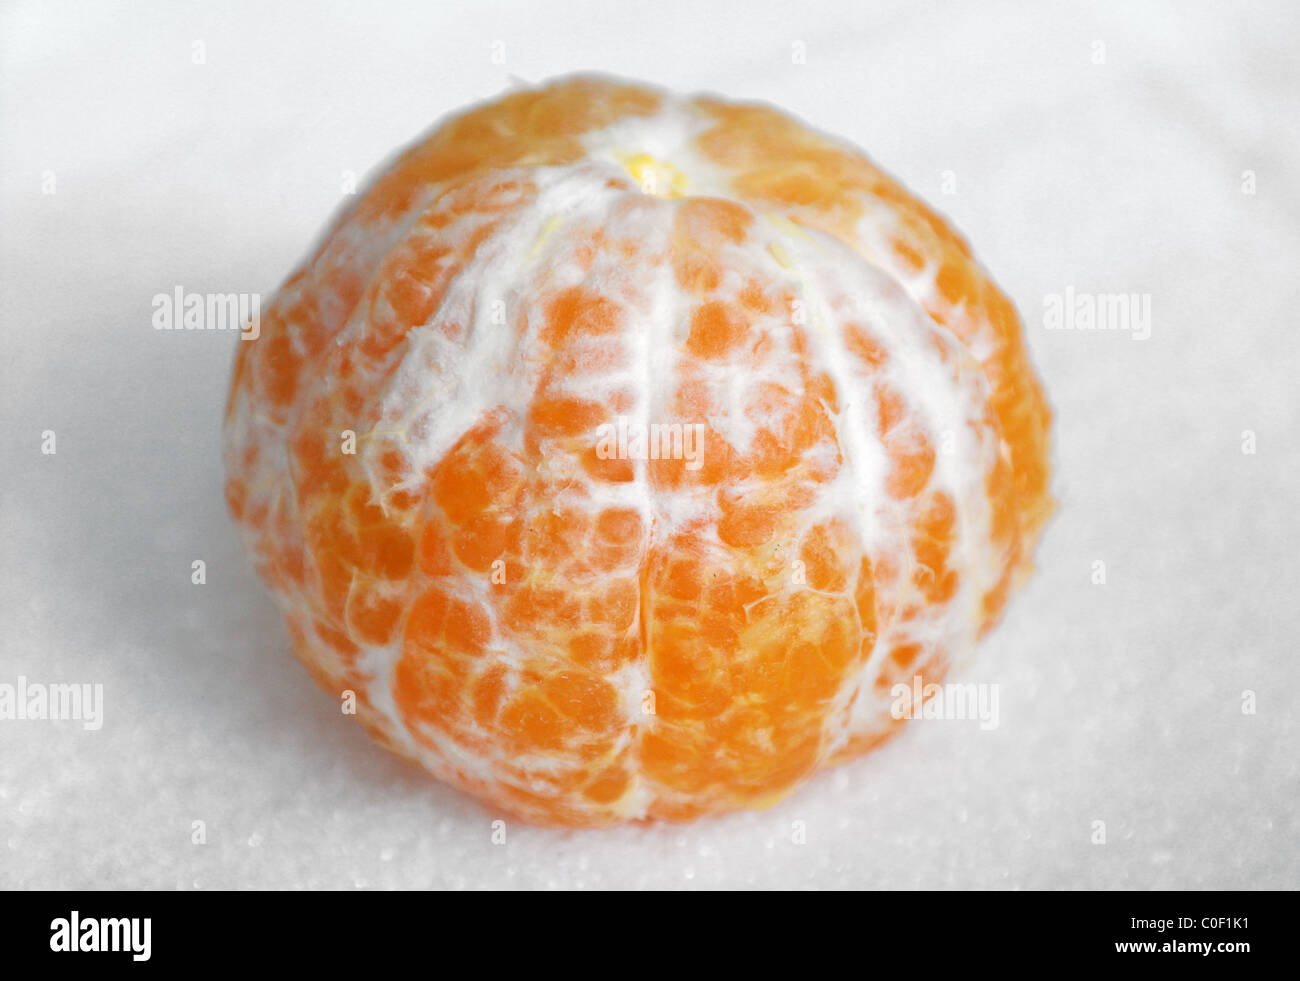 The cleared tangerine on granulated sugar Stock Photo